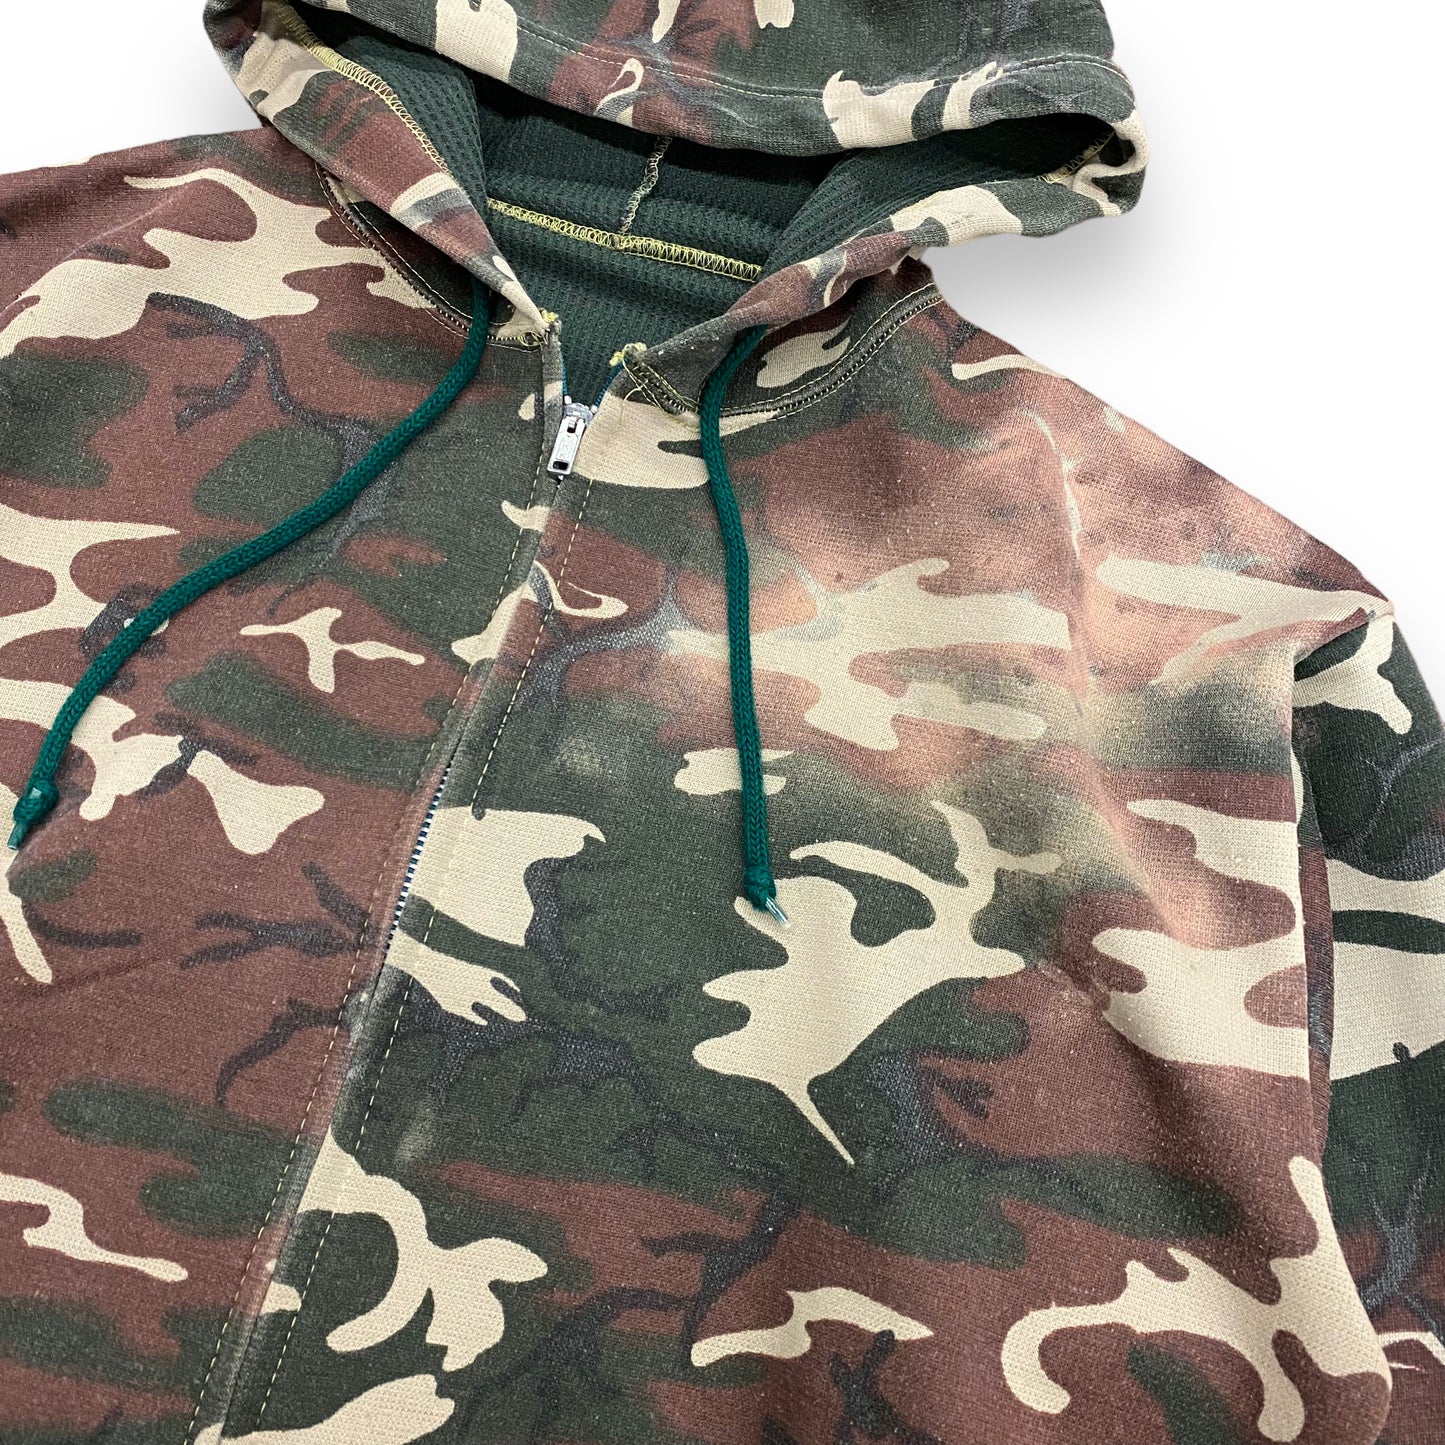 Vintage 1980s Handmade Thrashed Camouflage Thermal Lined Zip Up Hoodie - Size Large